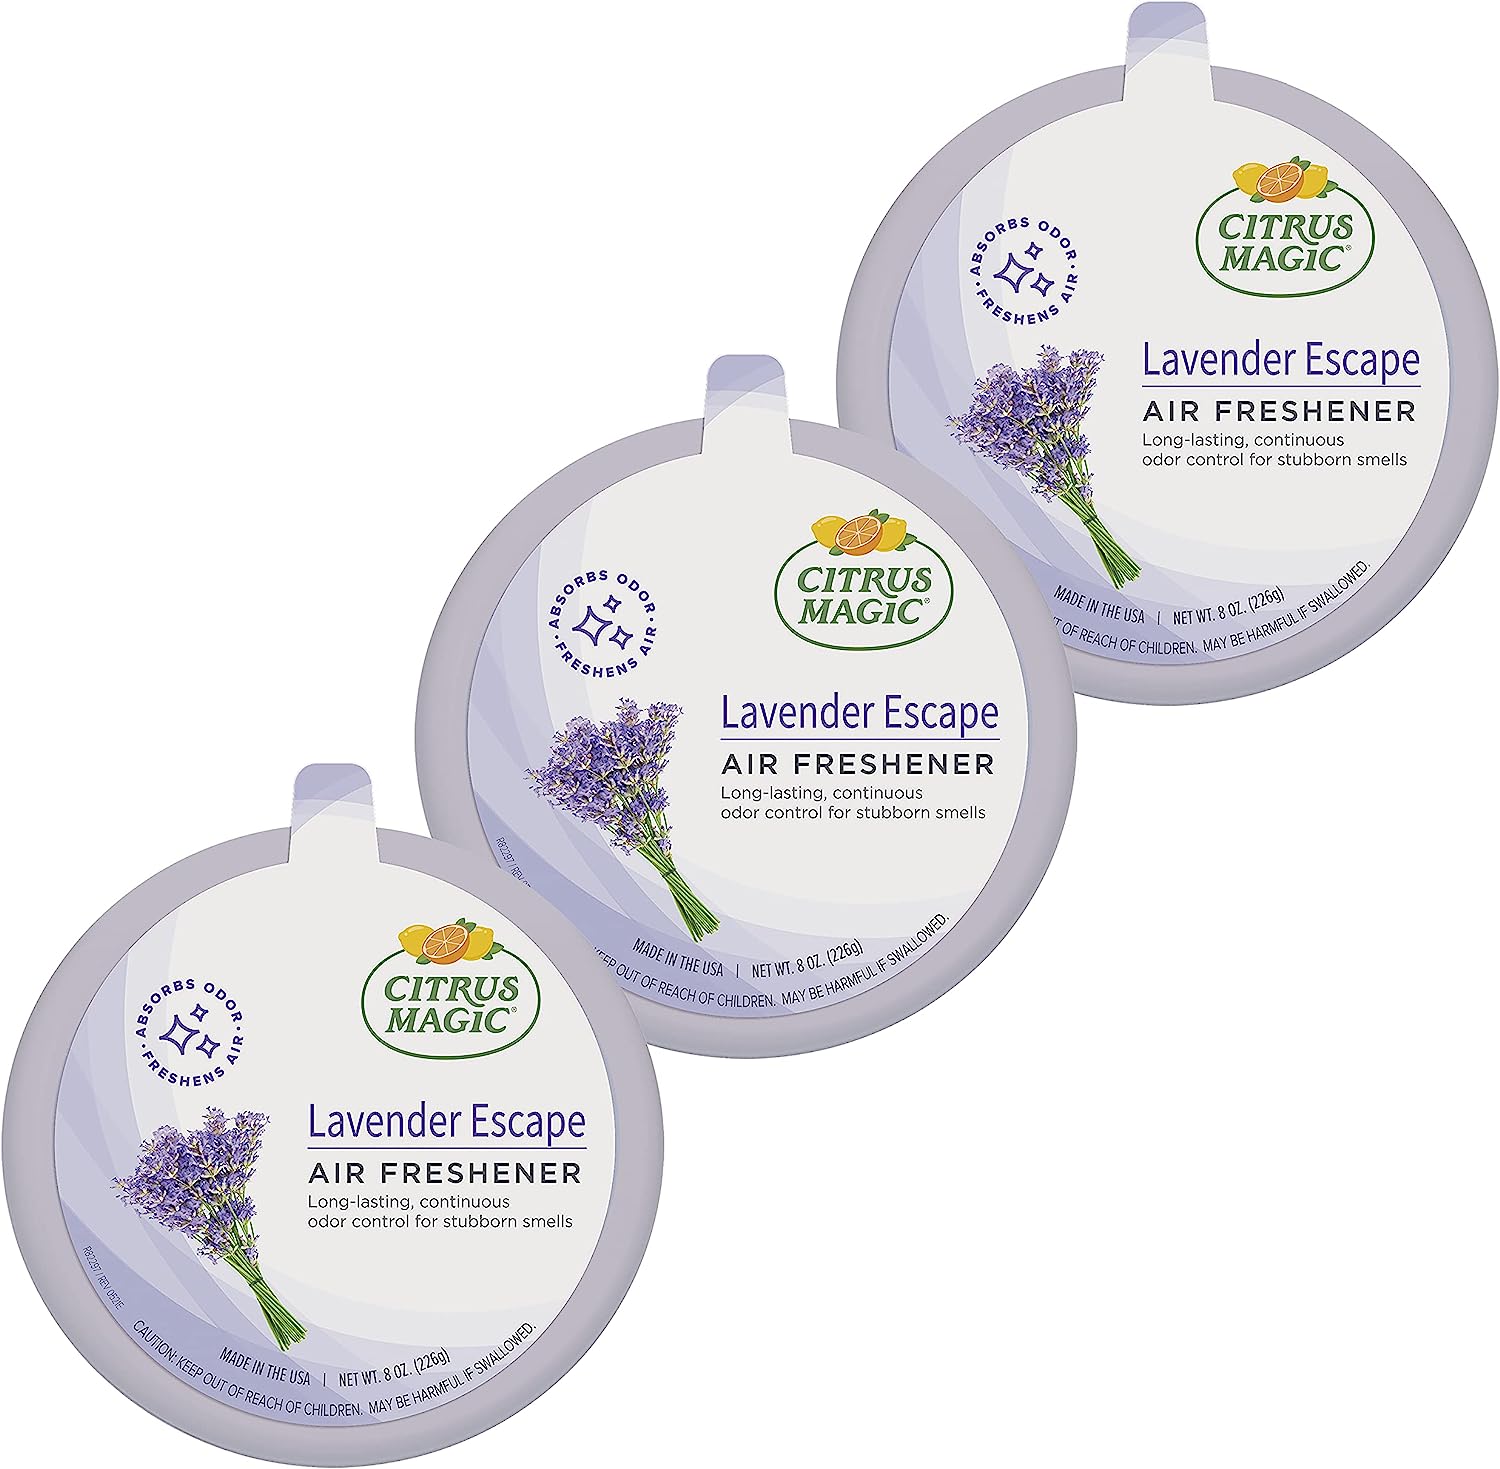 Citrus Magic Odor Absorbing Solid Air Freshener, Lavender Escape, 8-Ounce, 8 Ounce (Pack of 3), 3 Count